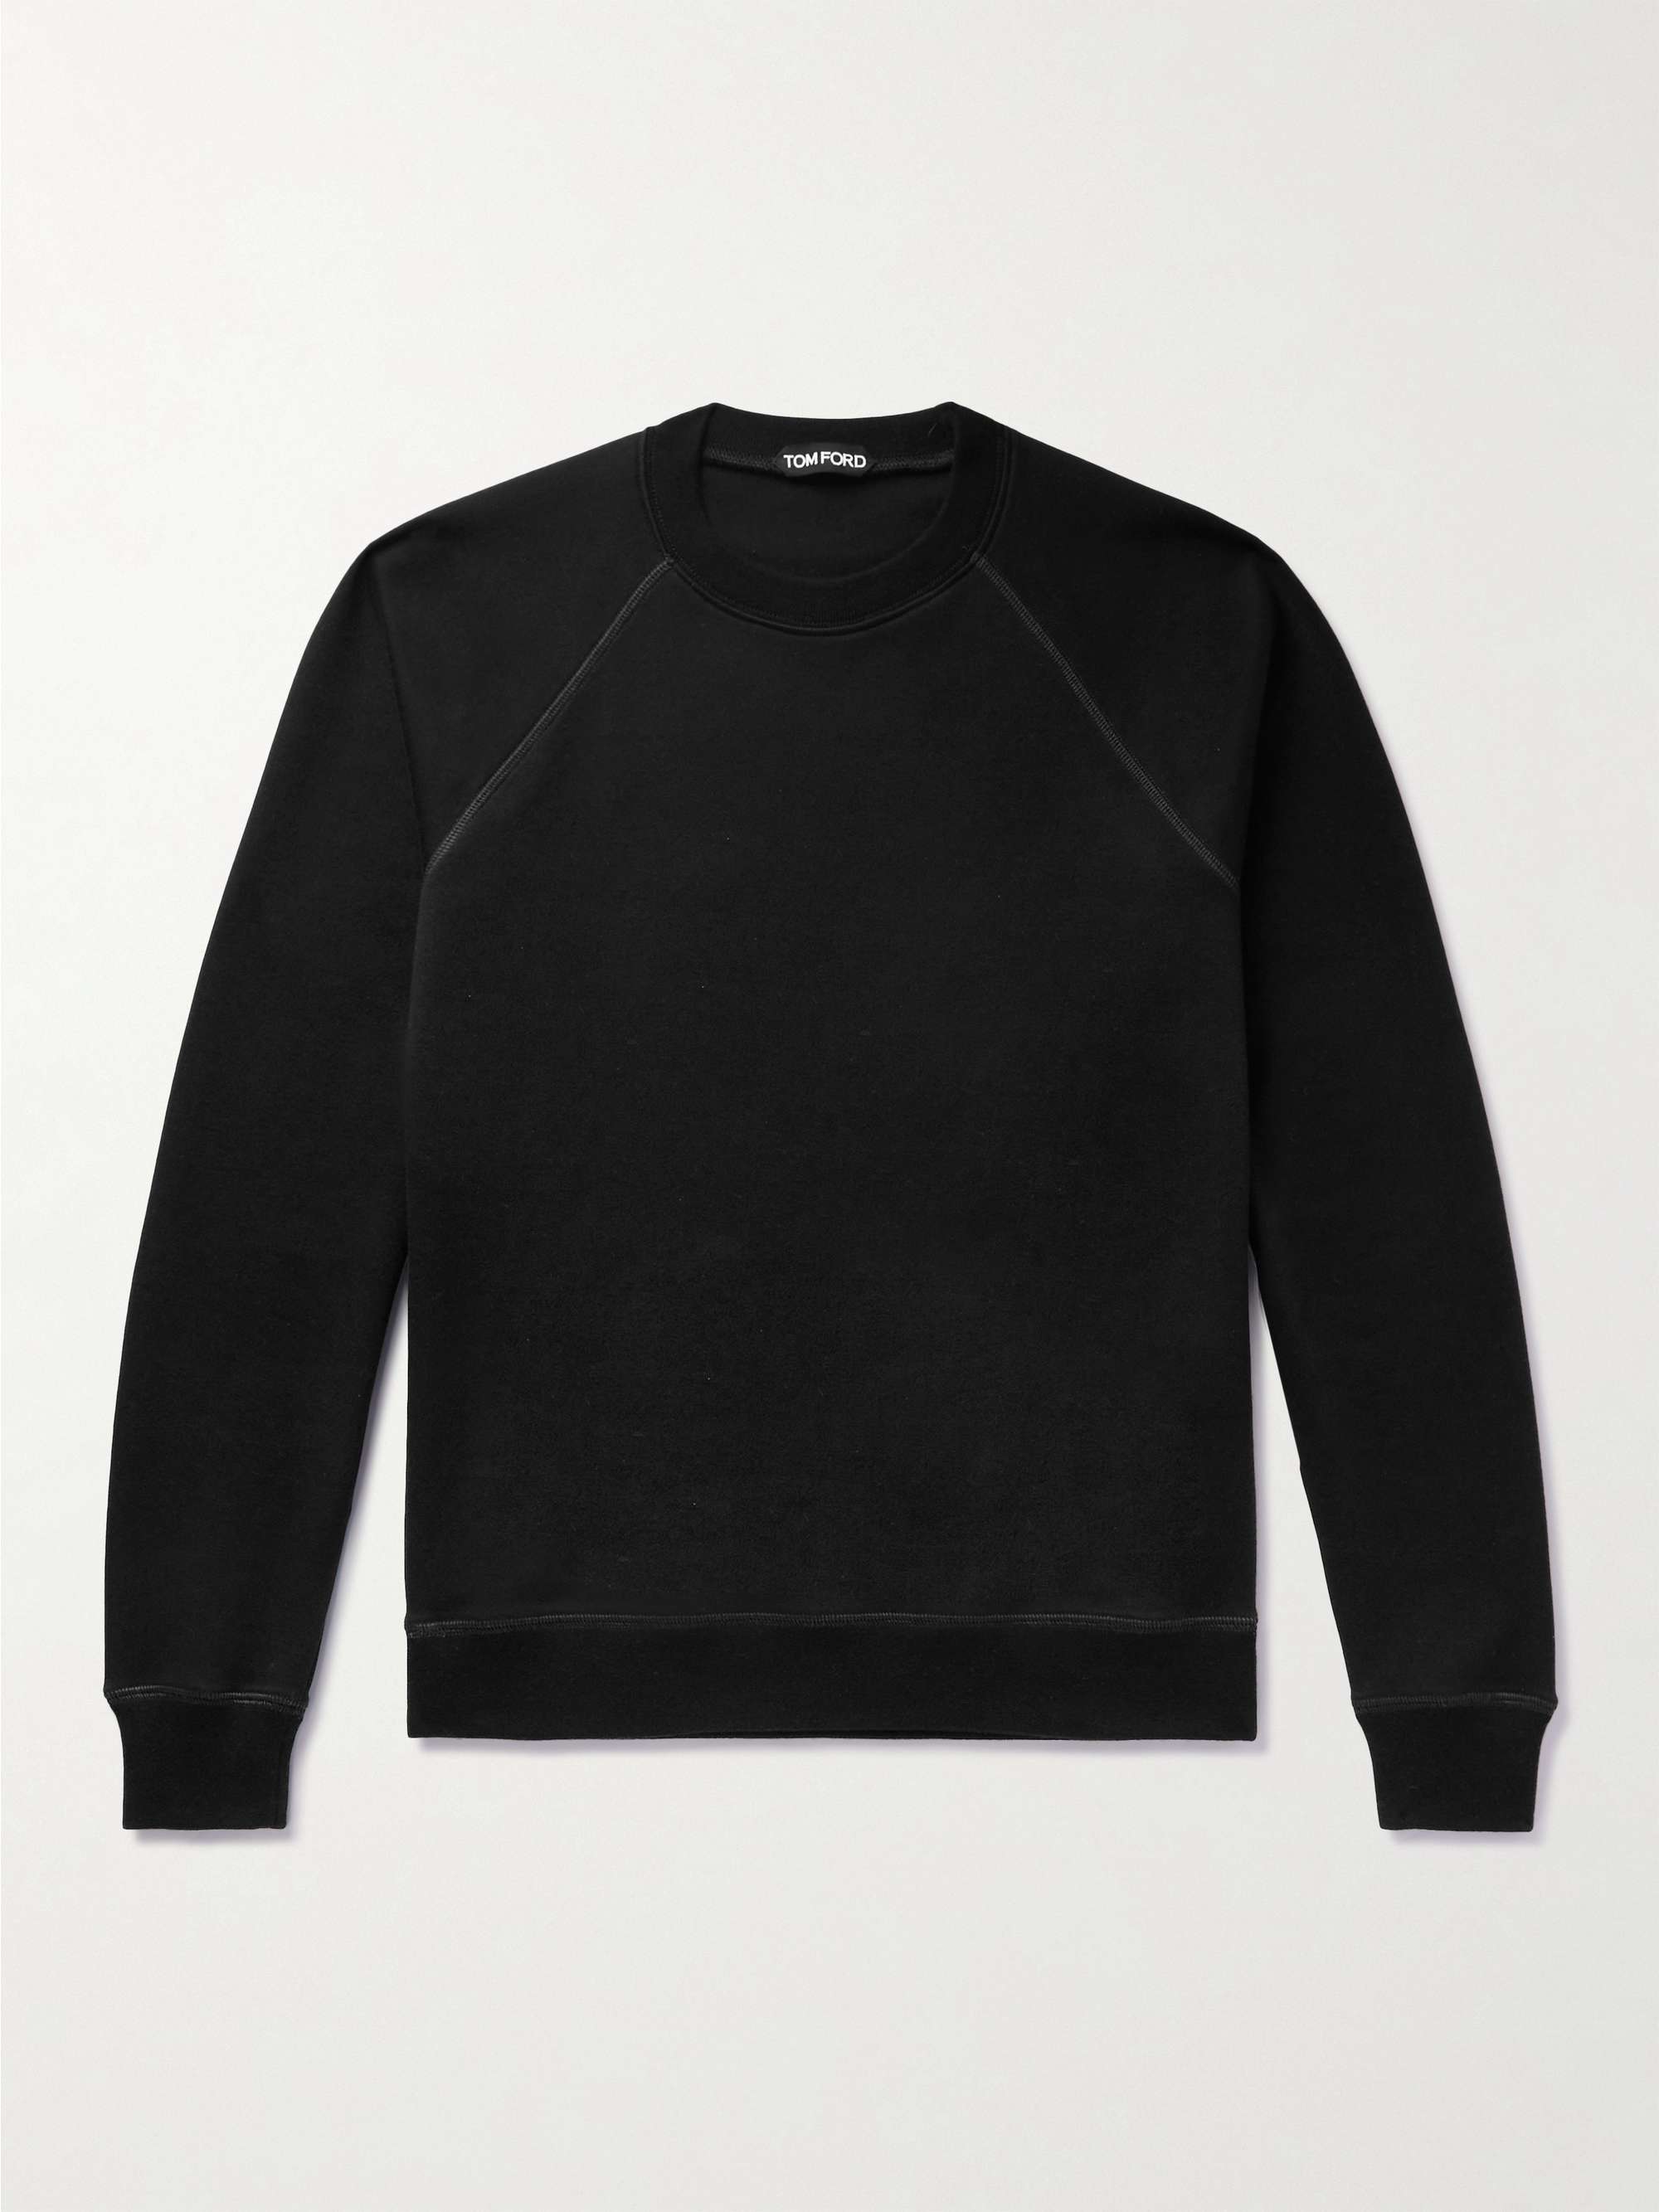 TOM FORD Garment-Dyed Cotton-Jersey Sweatshirt for Men